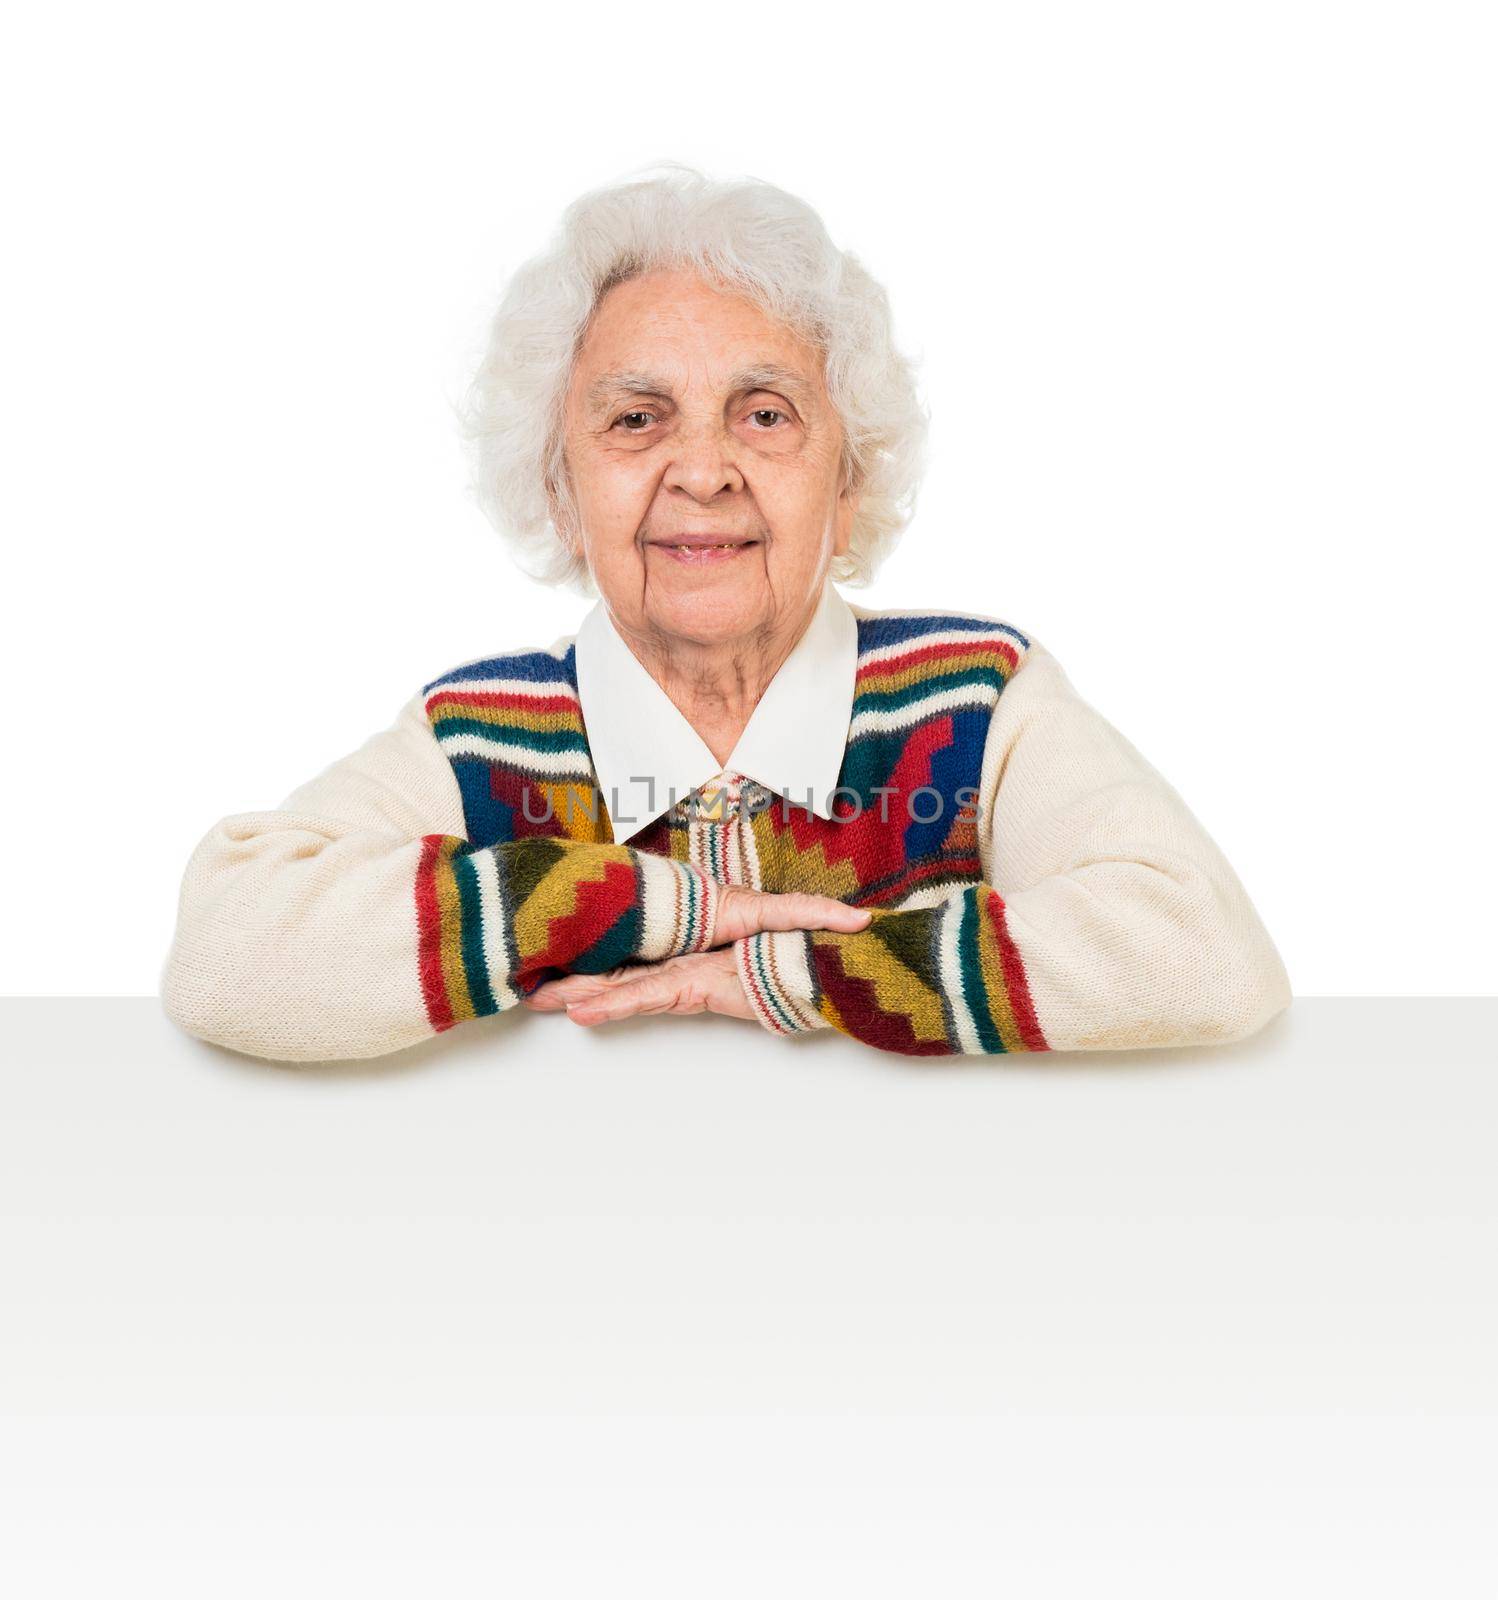 elderly woman behind a board over white background by tan4ikk1